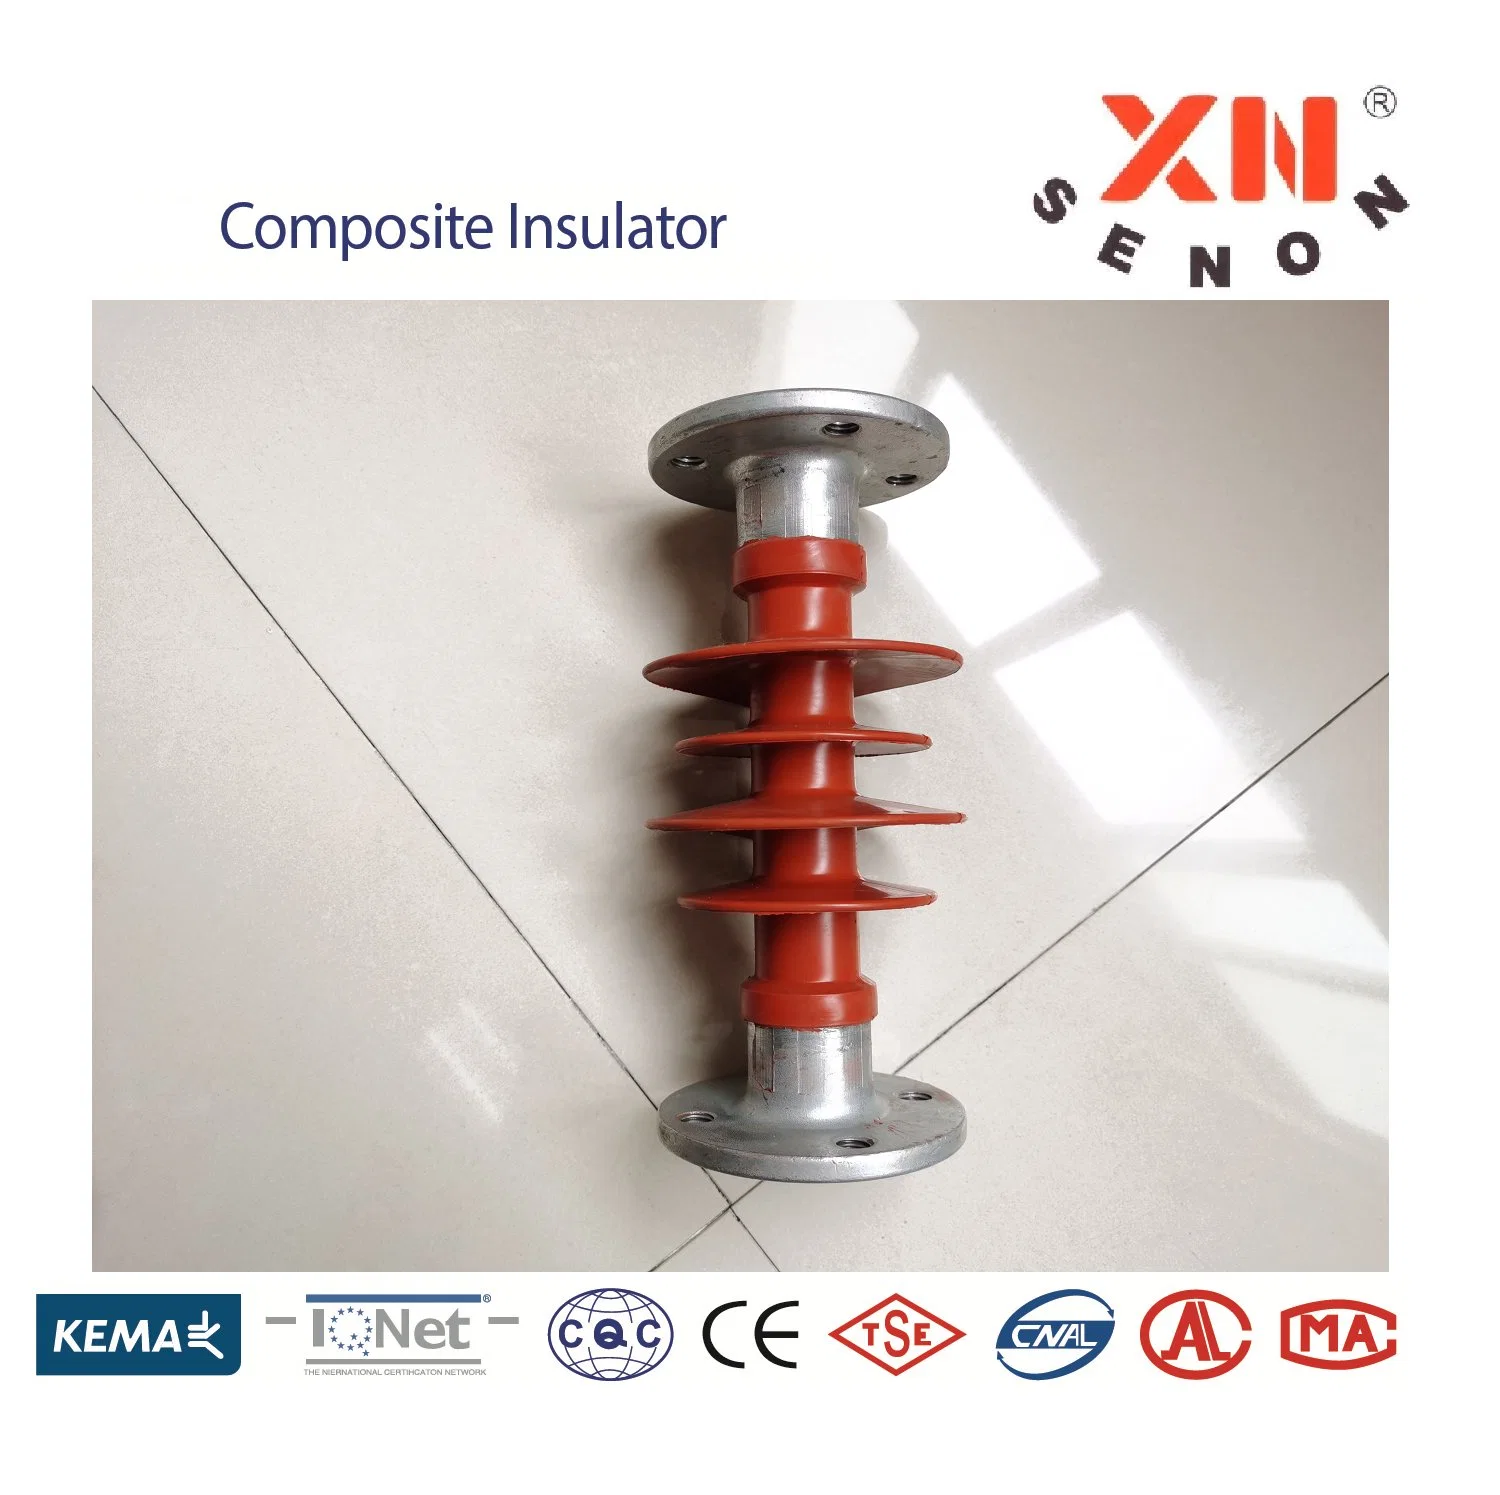 Fzsw-12/2.5 Silicon Rubber Housed High Voltage Post Composite Insulator